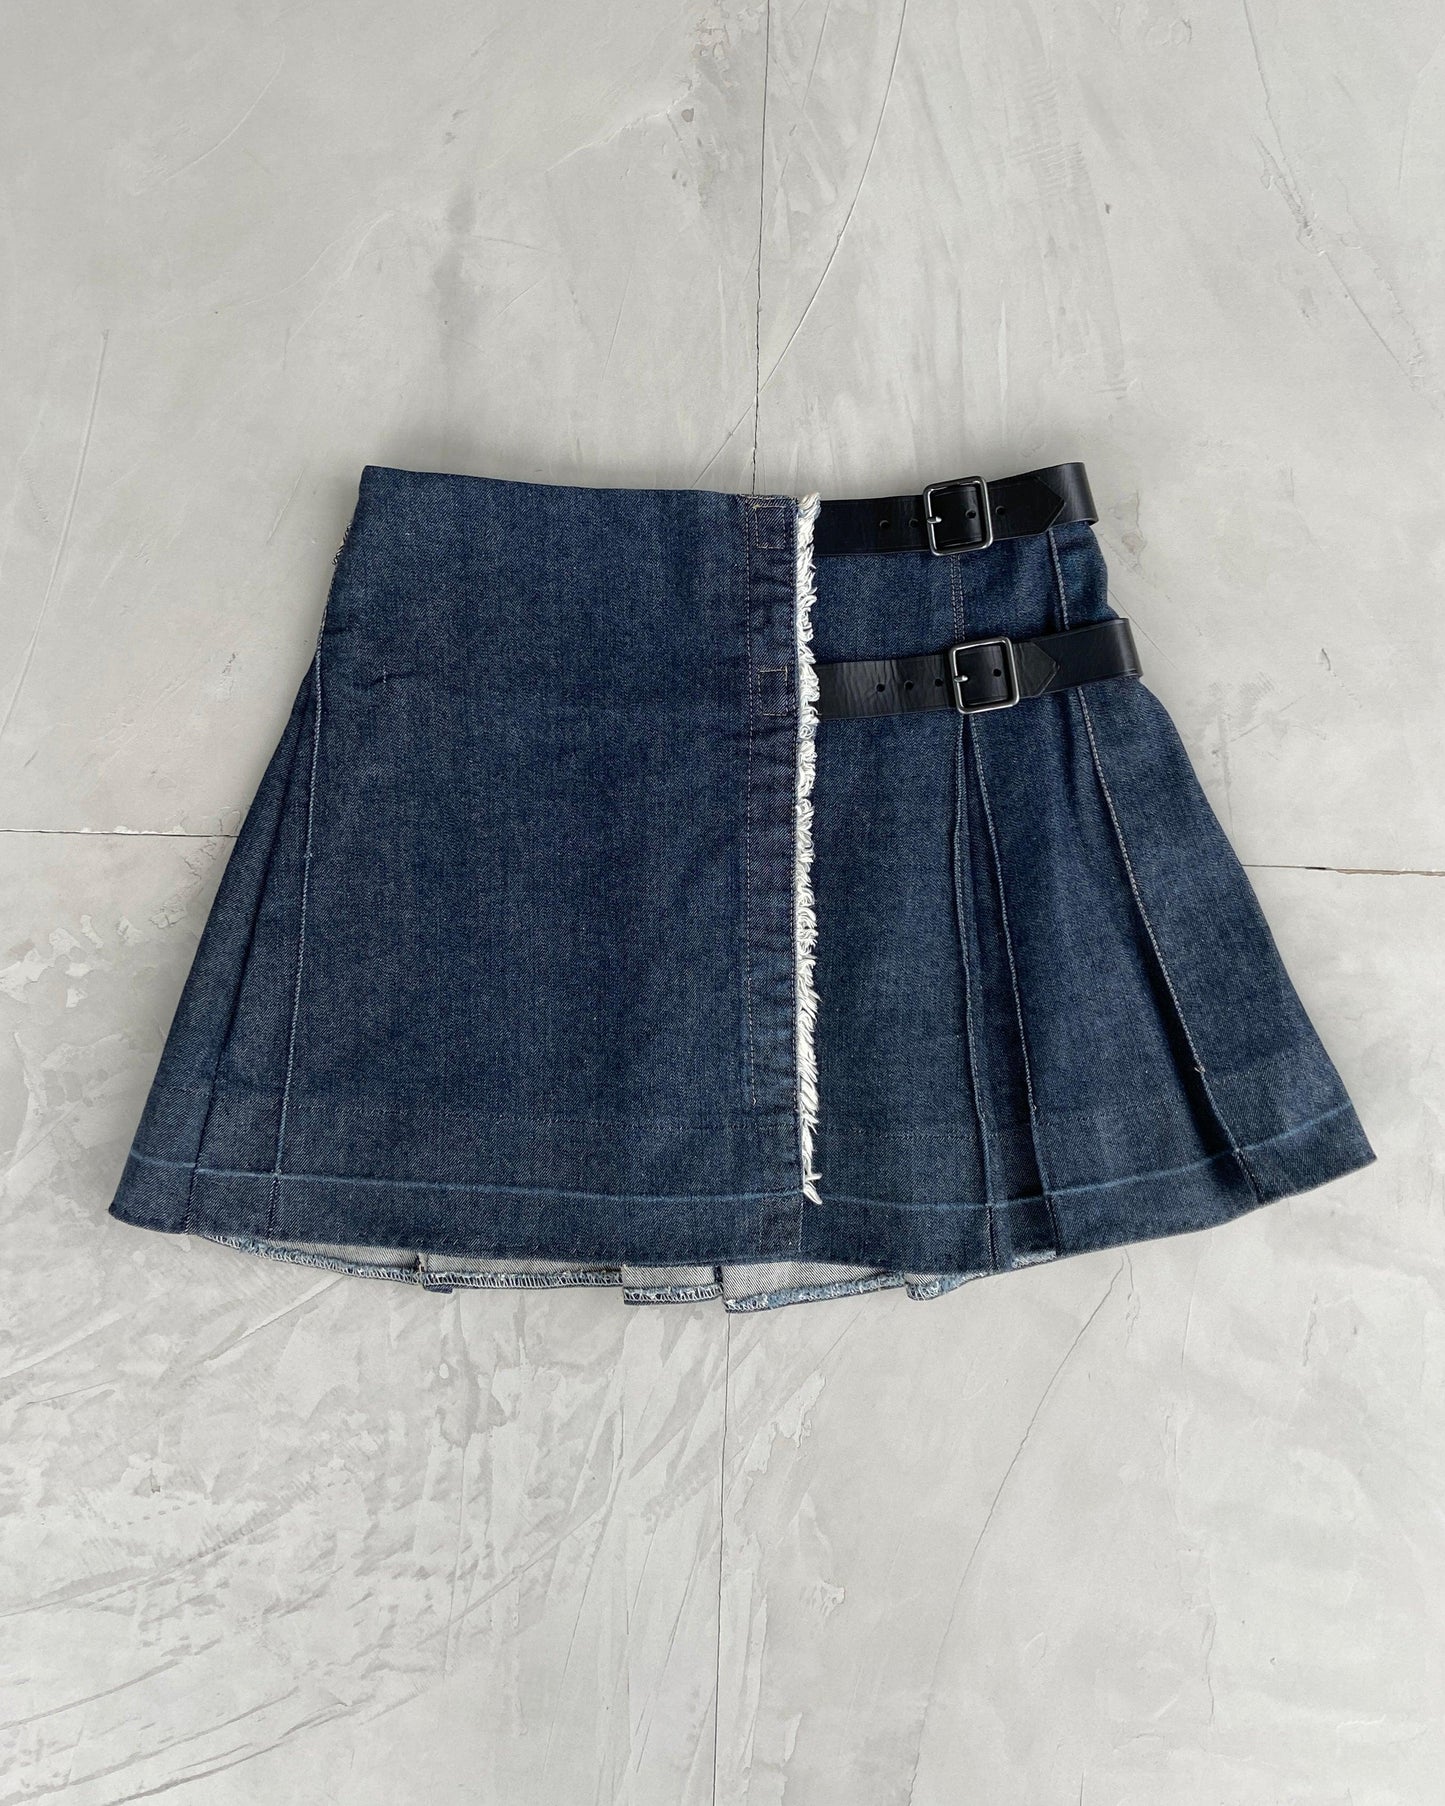 BURBERRY PLEATED BELT WRAP SKIRT - S/M - Known Source